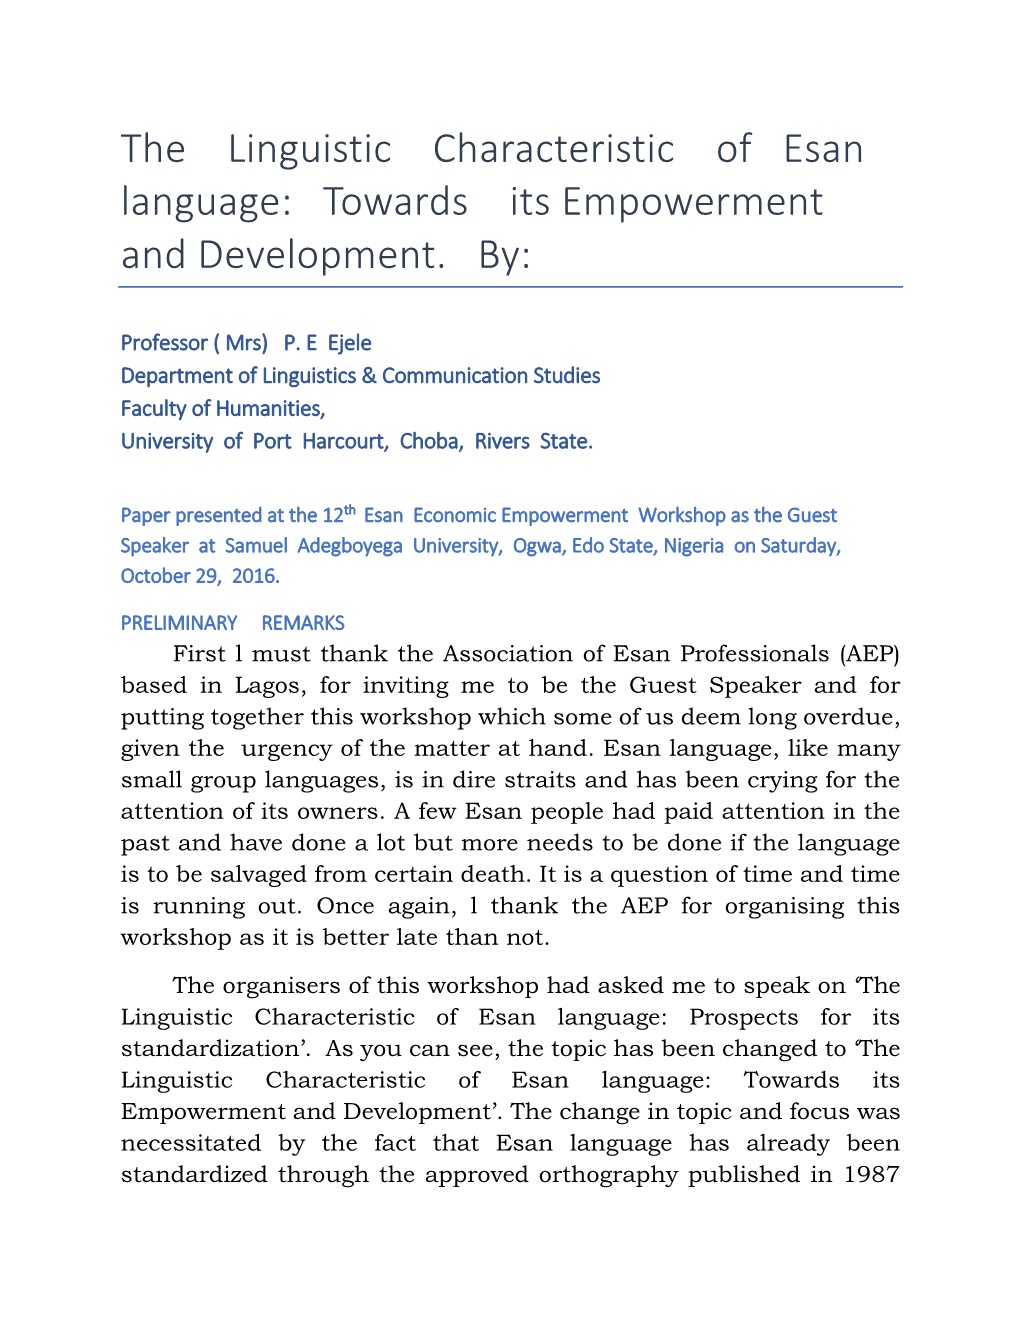 The Linguistic Characteristic of Esan Language: Towards Its Empowerment and Development